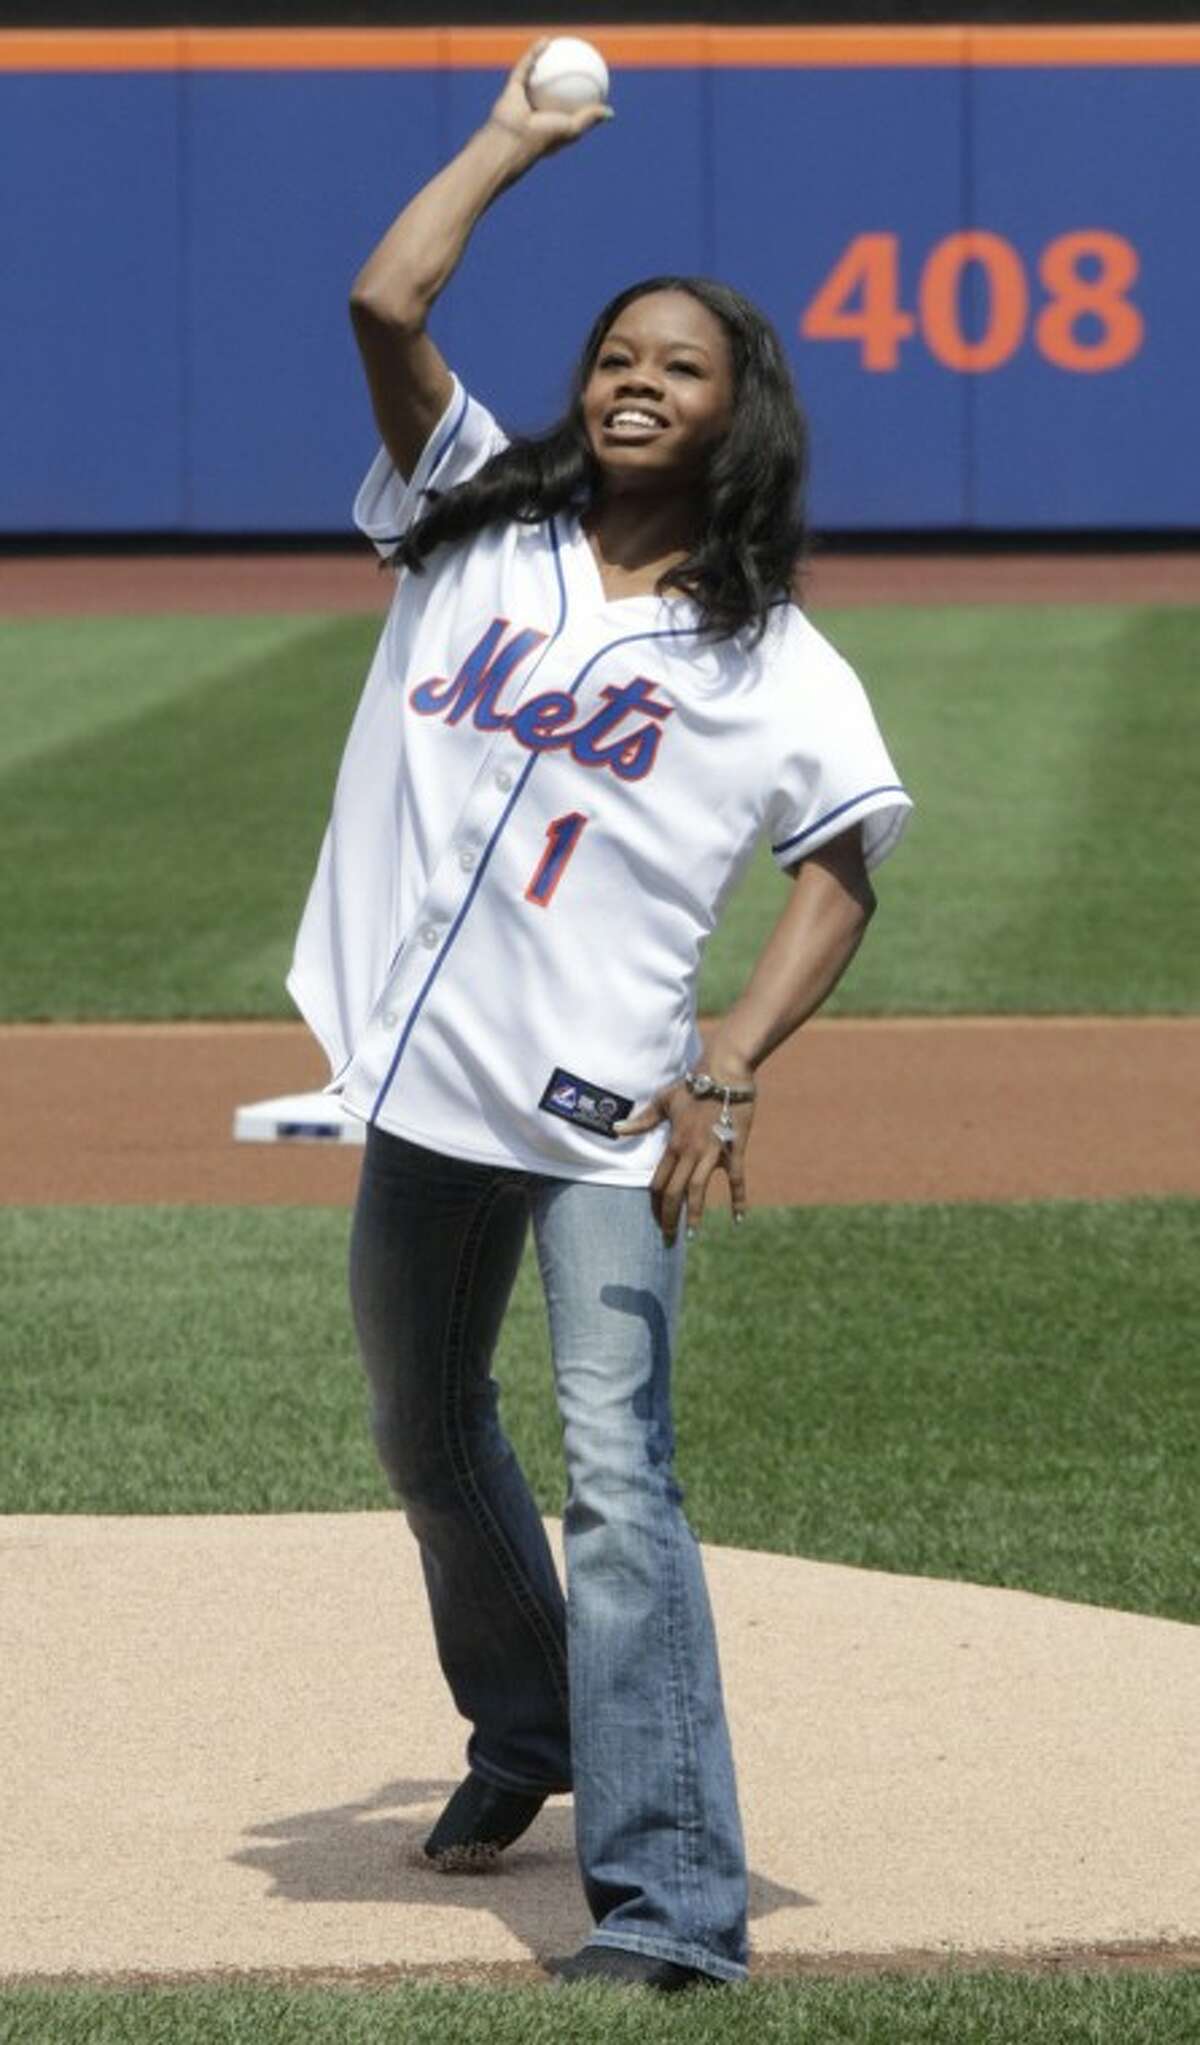 Olympic gold medal gymnast Gabrielle Douglas throws out the ceremonial first pitch before a baseball game between the New York Mets and the Colorado Rockies, Thursday, Aug. 23, 2012, in New York. (AP Photo/Frank Franklin II)